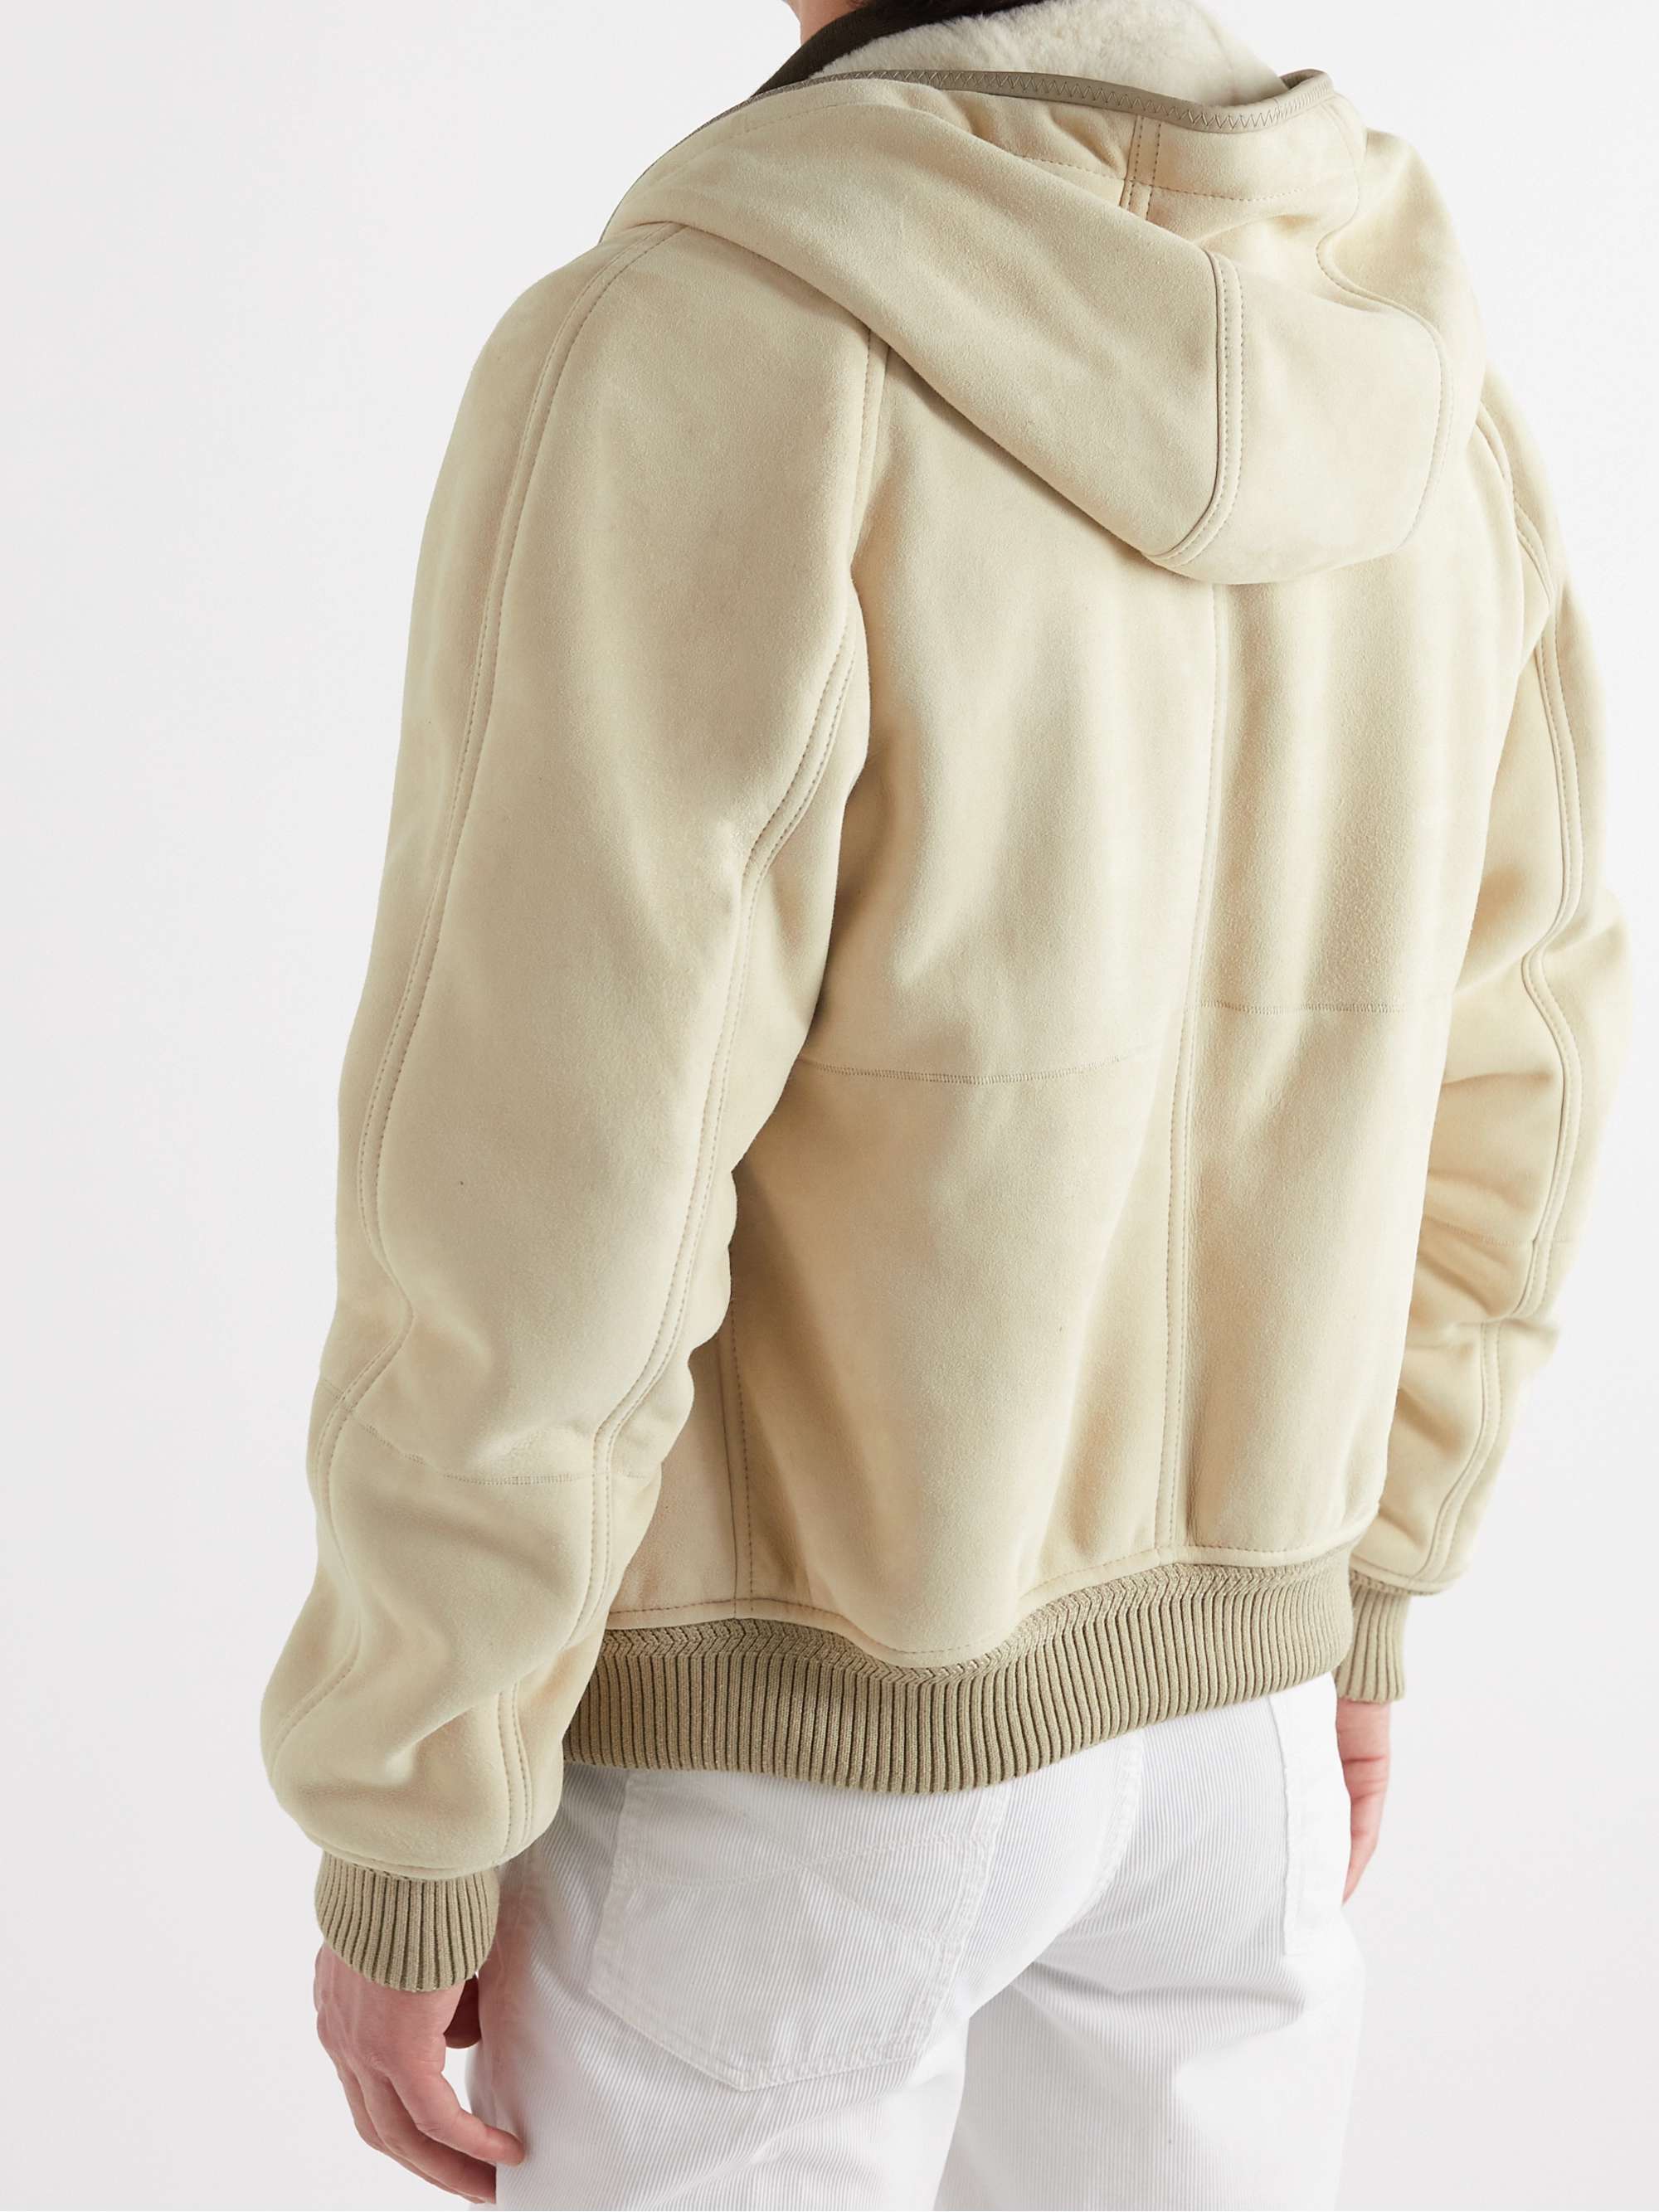 TOM FORD Leather-Trimmed Shearling Hooded Bomber Jacket